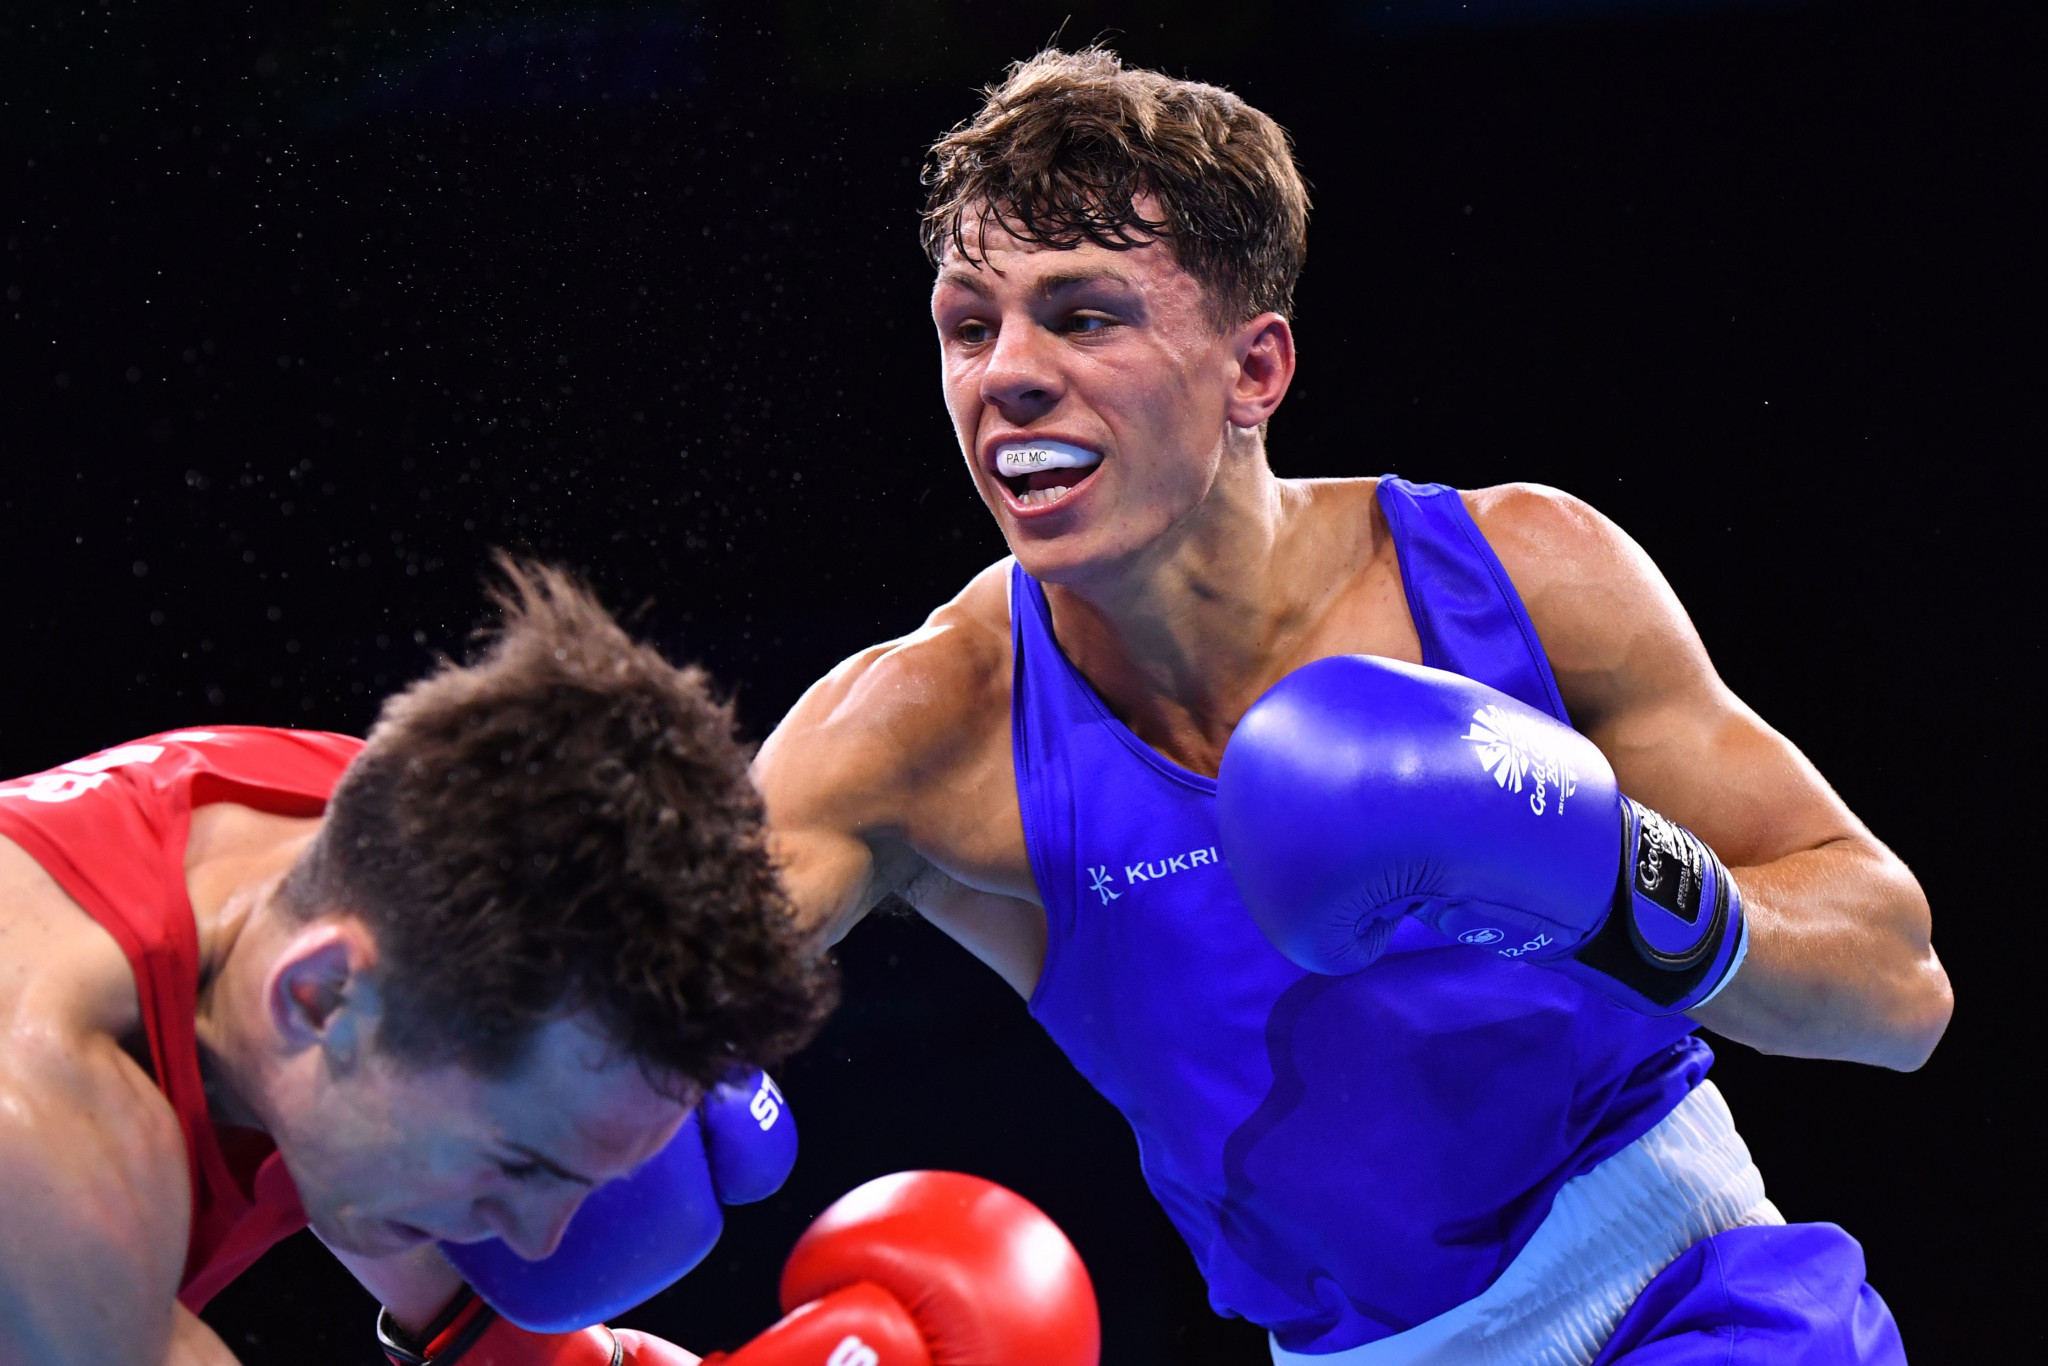 England's Pat McCormack narrowly defeated Aidan Walsh of Ireland in a repeat of the Gold Coast 2018 Commonwealth Games welterweight final ©Getty Images